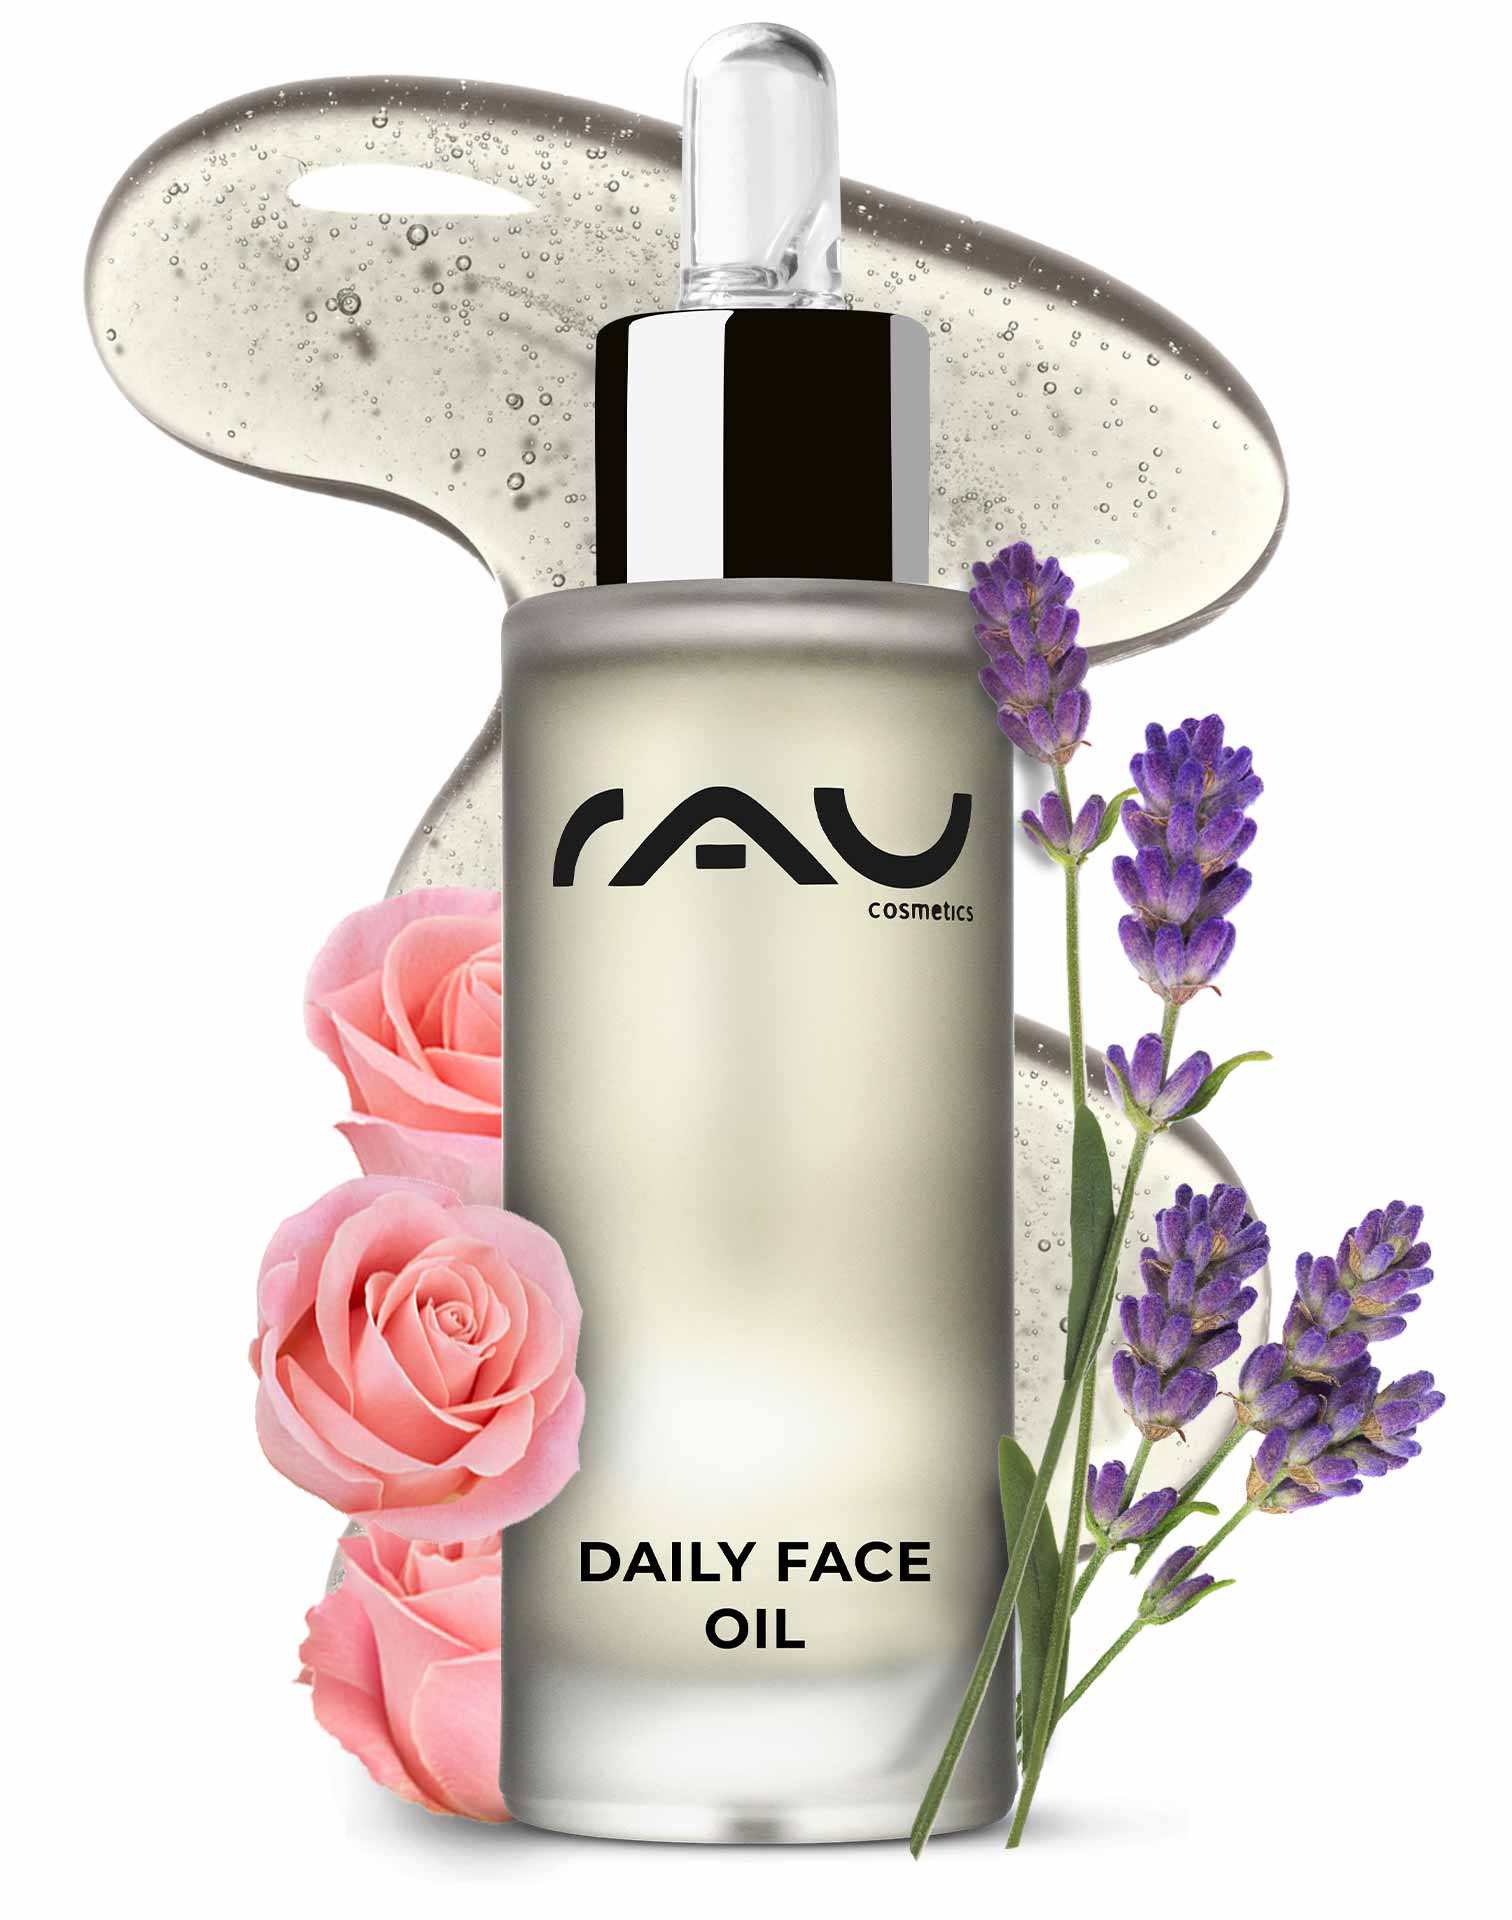 Daily Face Oil 30 ml Nourishing face oil for the night with lavender